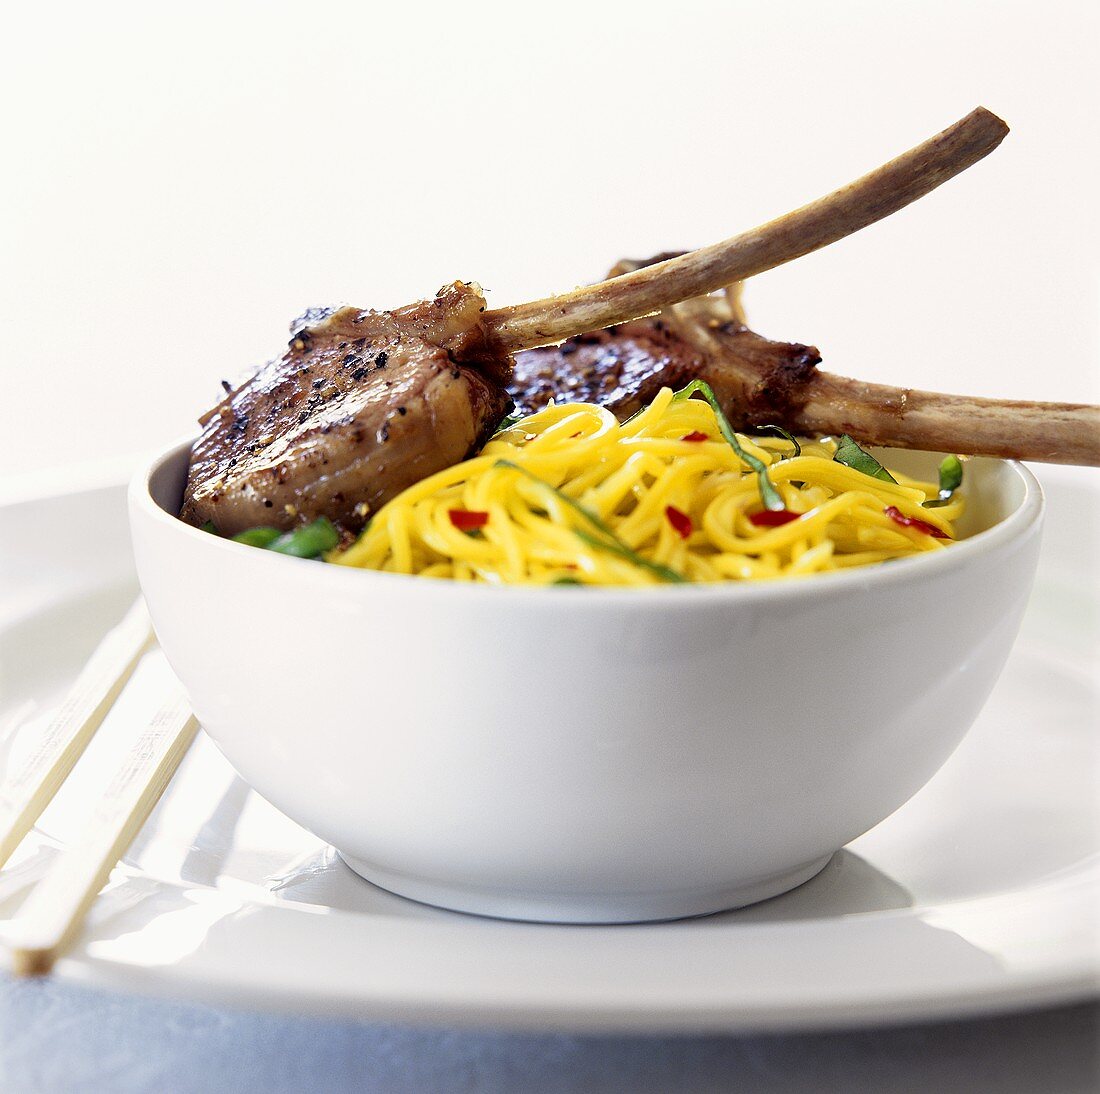 Lamb cutlets on yellow noodles